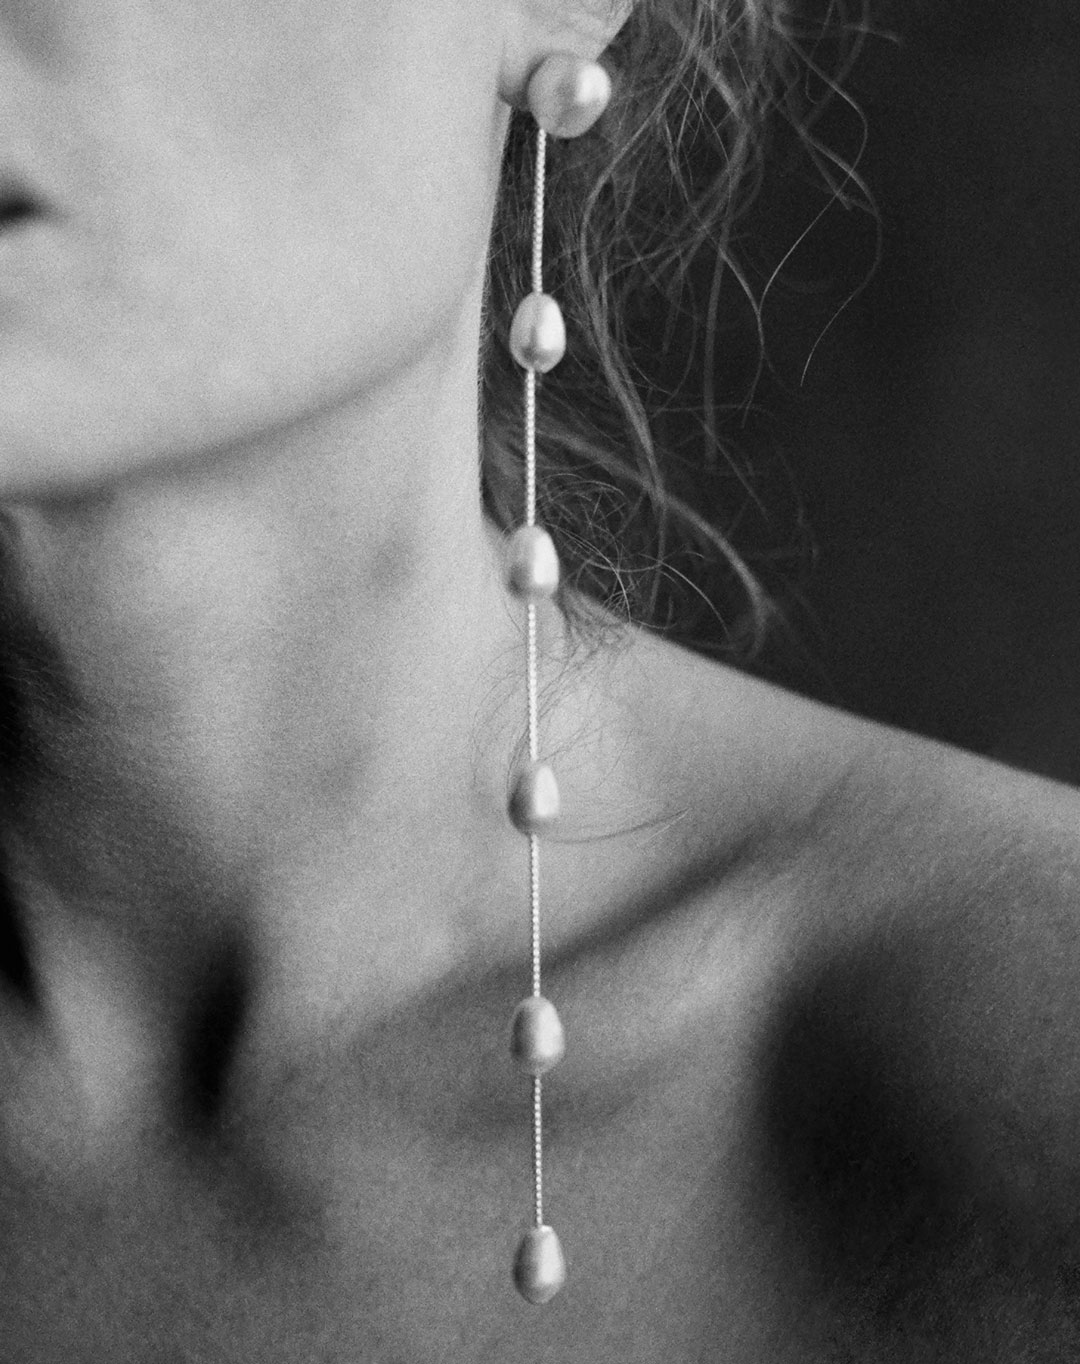 Sophie Buhai, Large Pearl Drop Earrings from the Fall/Winter 2017 collection - photo by Gillian Garcia